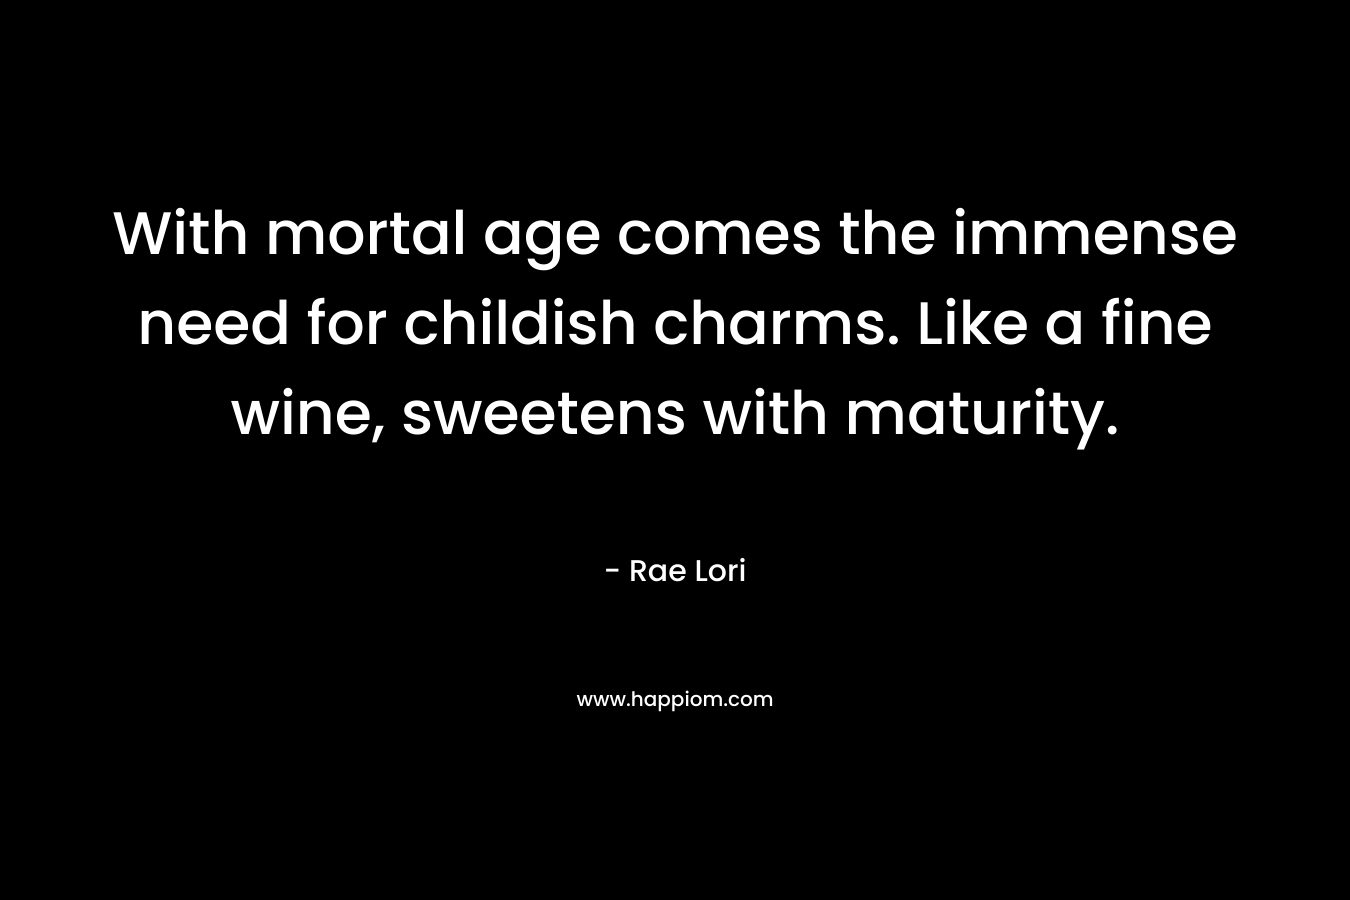 With mortal age comes the immense need for childish charms. Like a fine wine, sweetens with maturity.